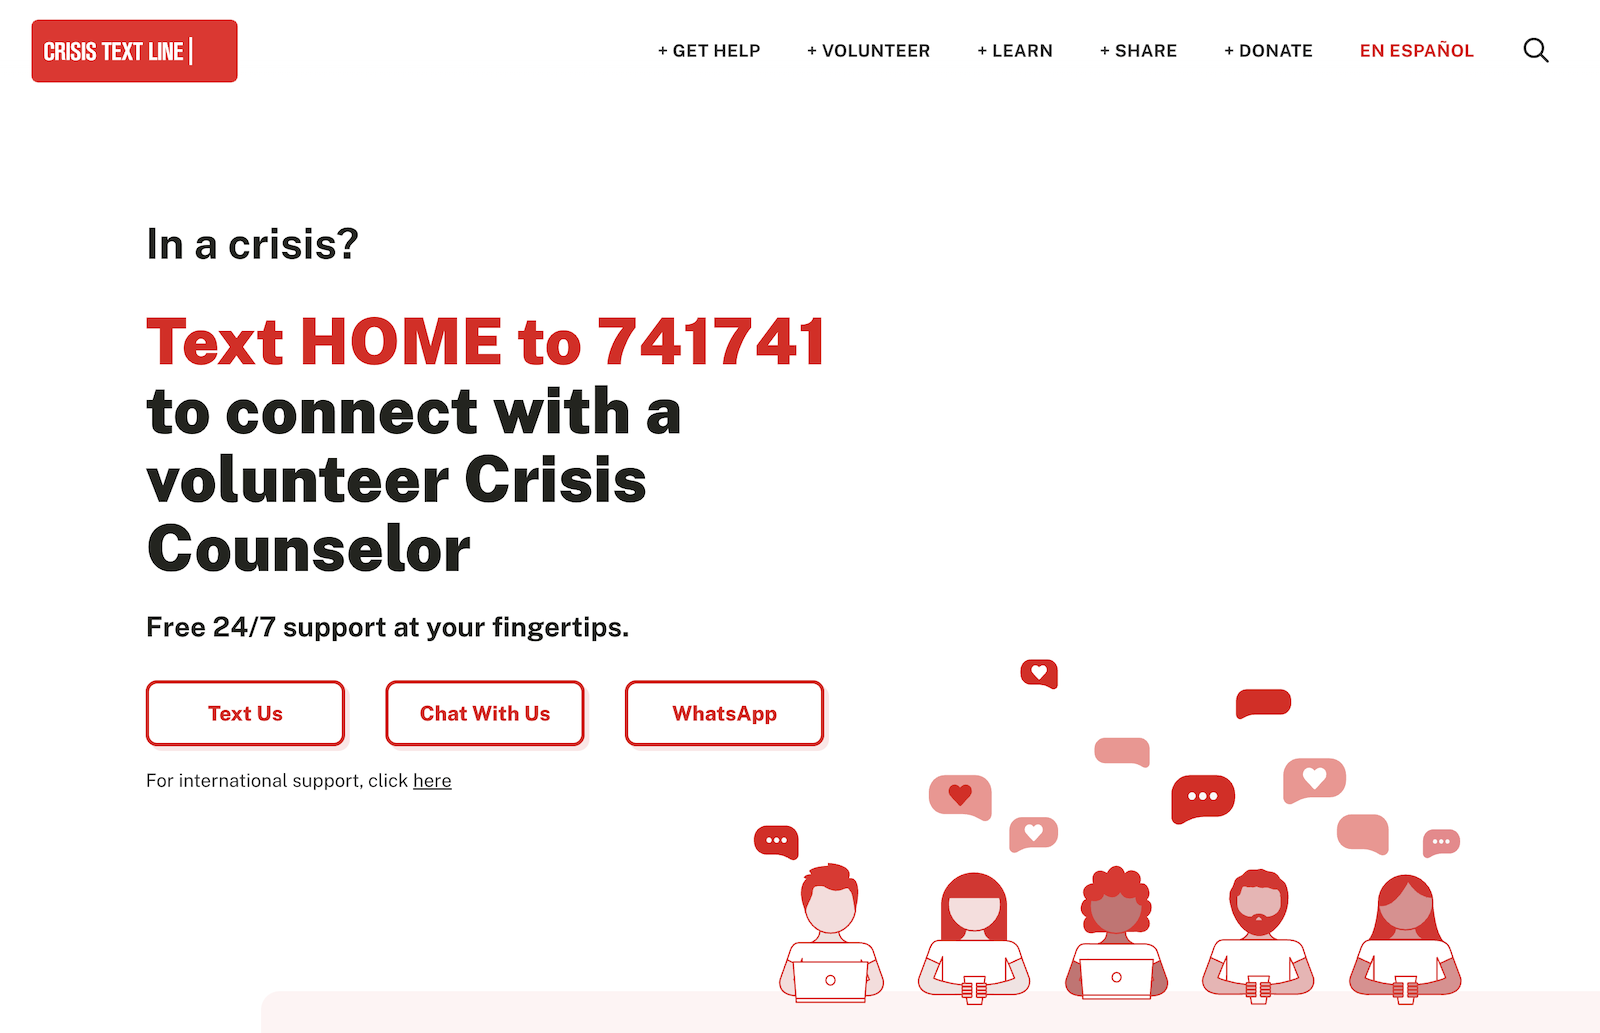 The website of the nonprofit organization Crisis Text Line makes it easy to find crucial information 